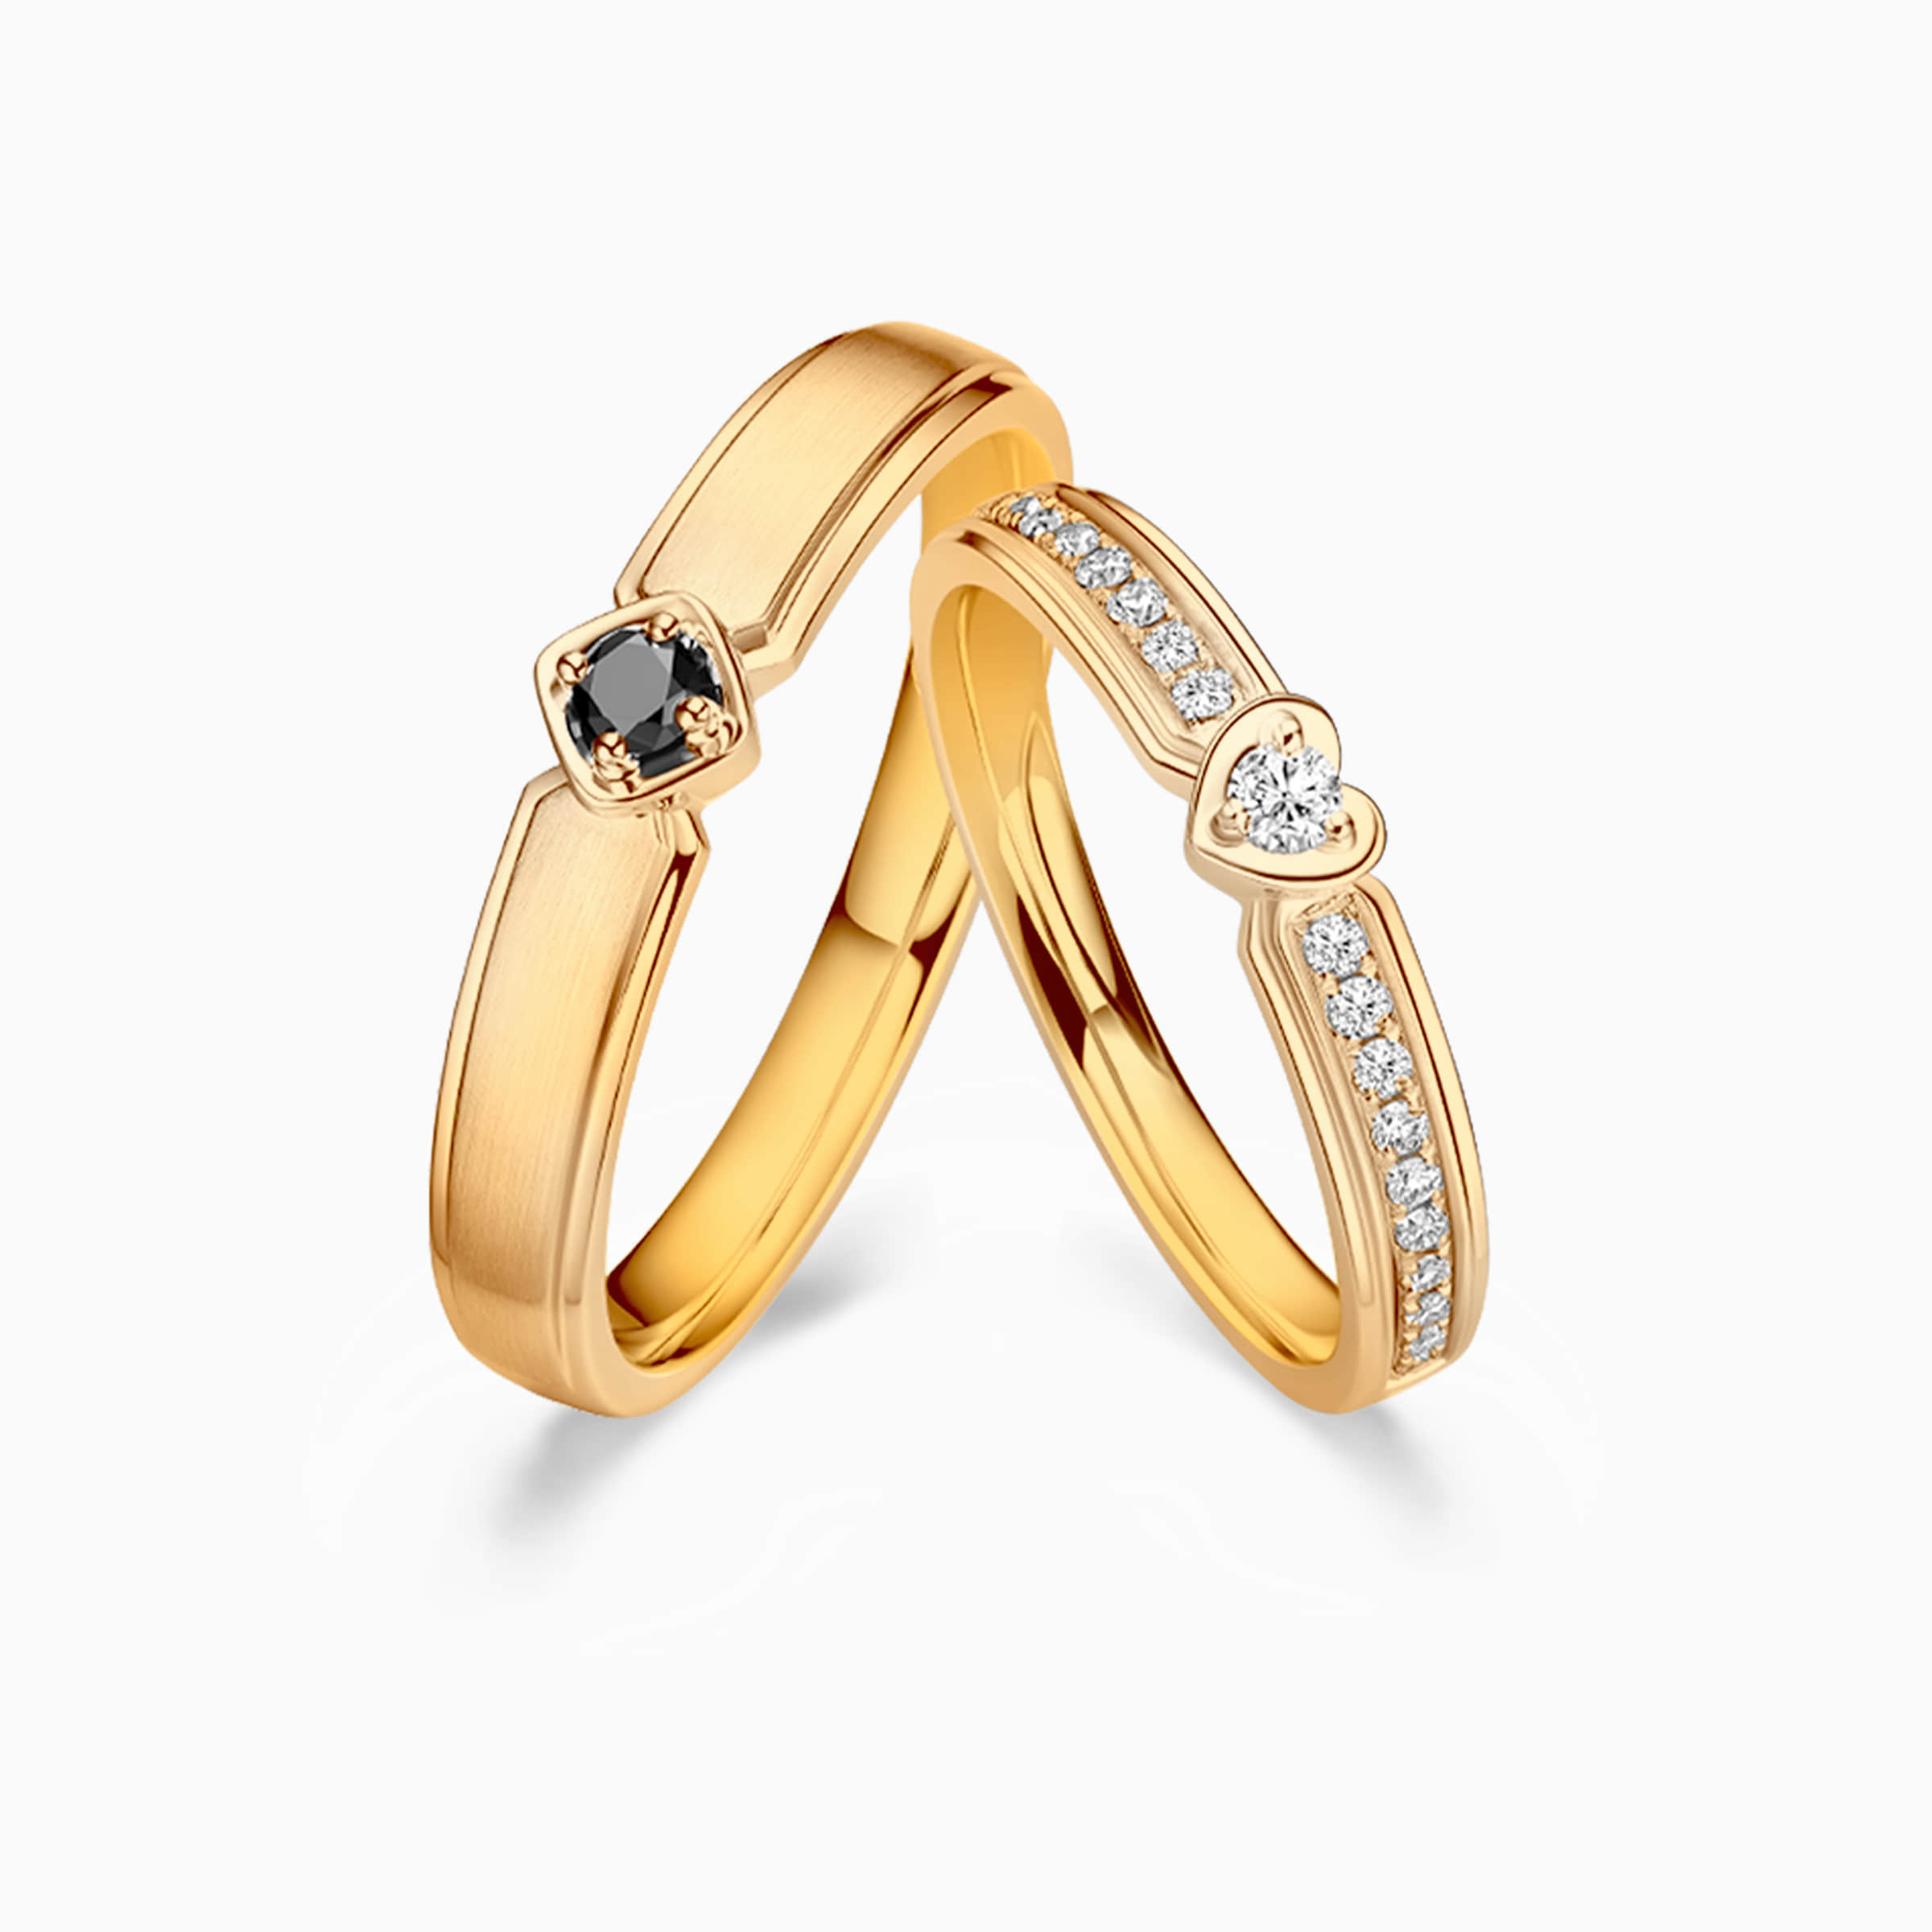 Darry Ring diamond wedding rings set for man and woman in yellow gold